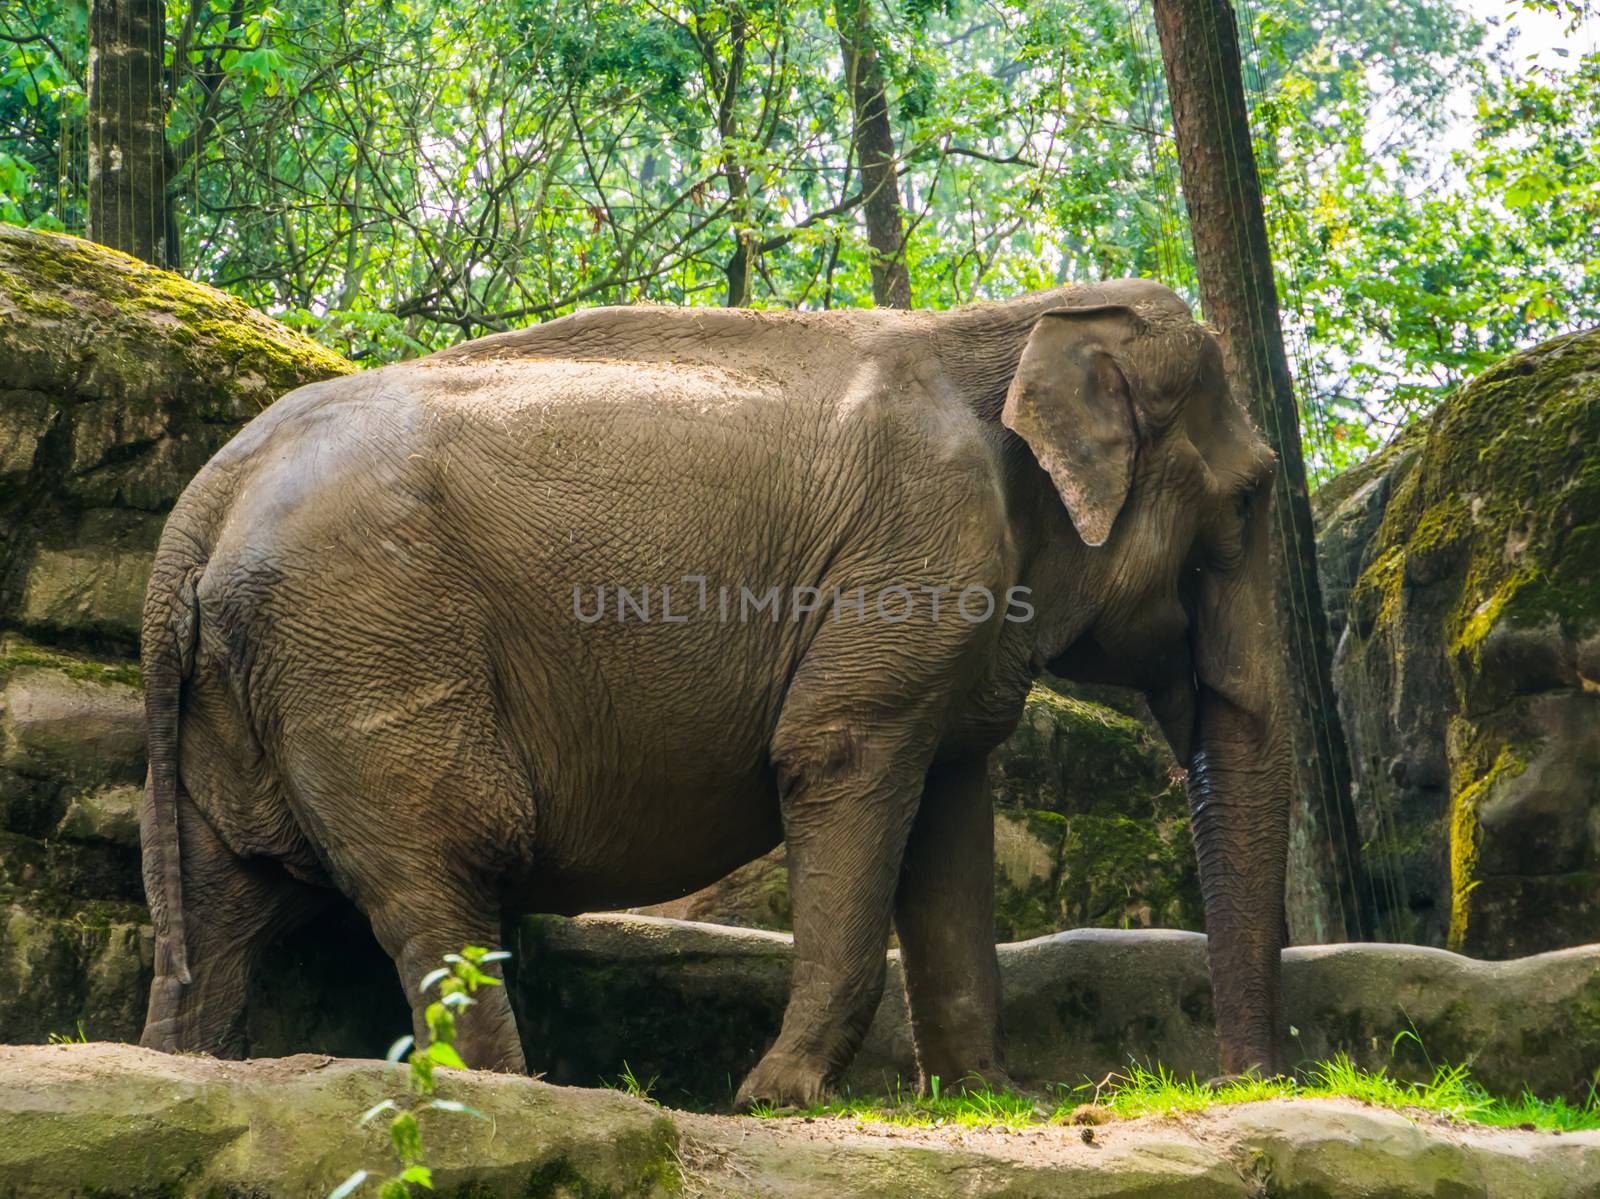 closeup portrait of a Asian elephant, Endangered animal specie from Asia by charlottebleijenberg